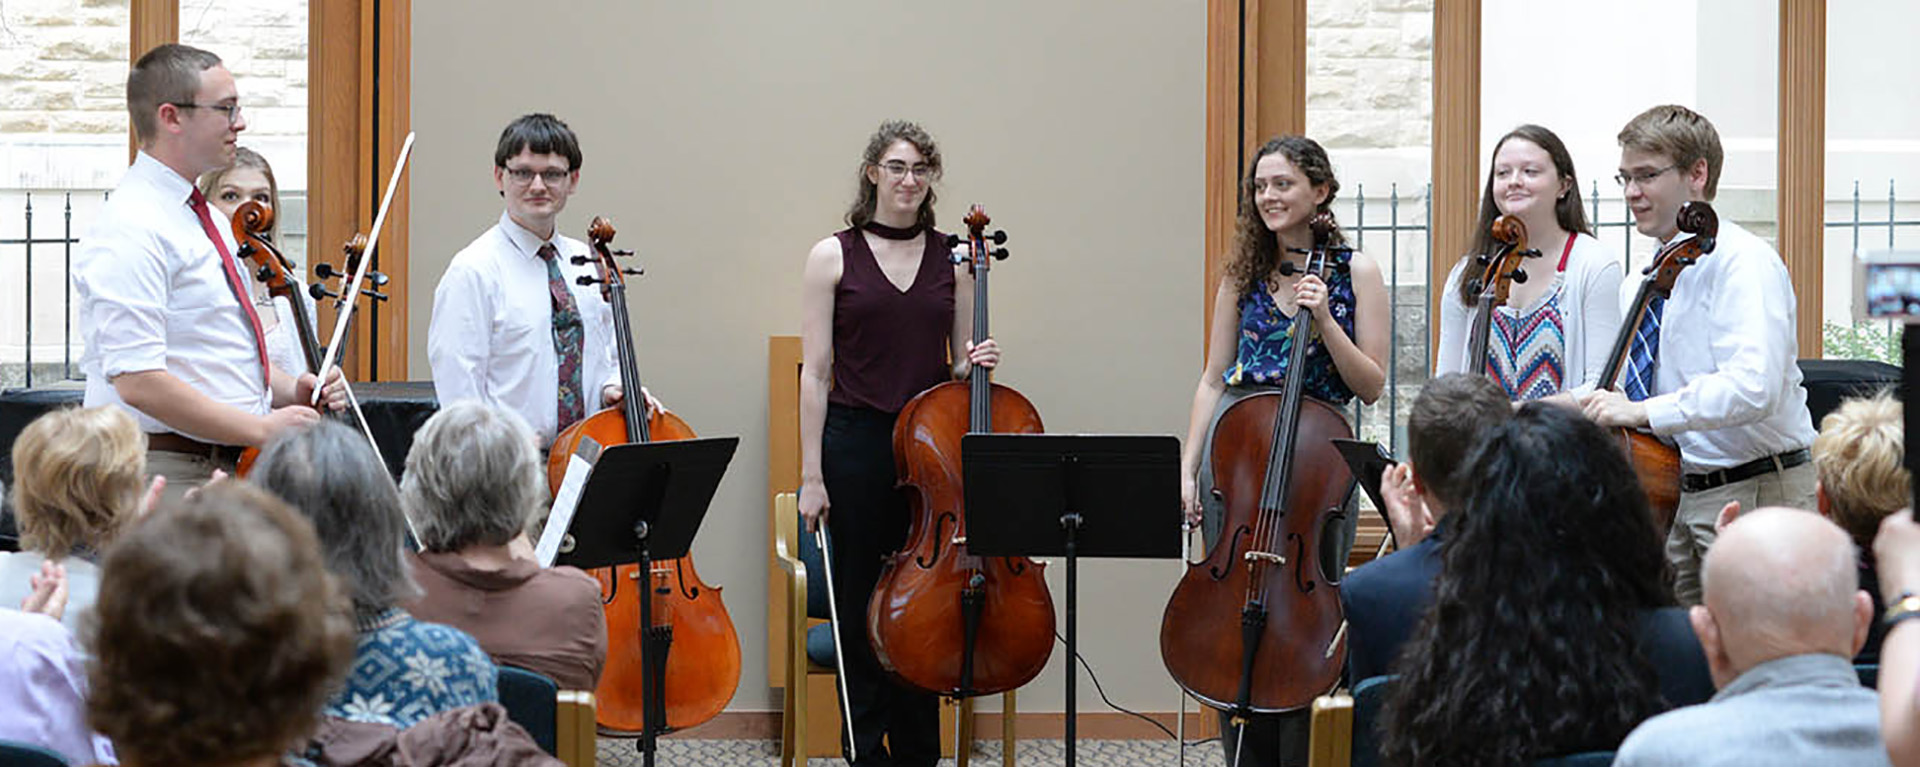 students at cello performance